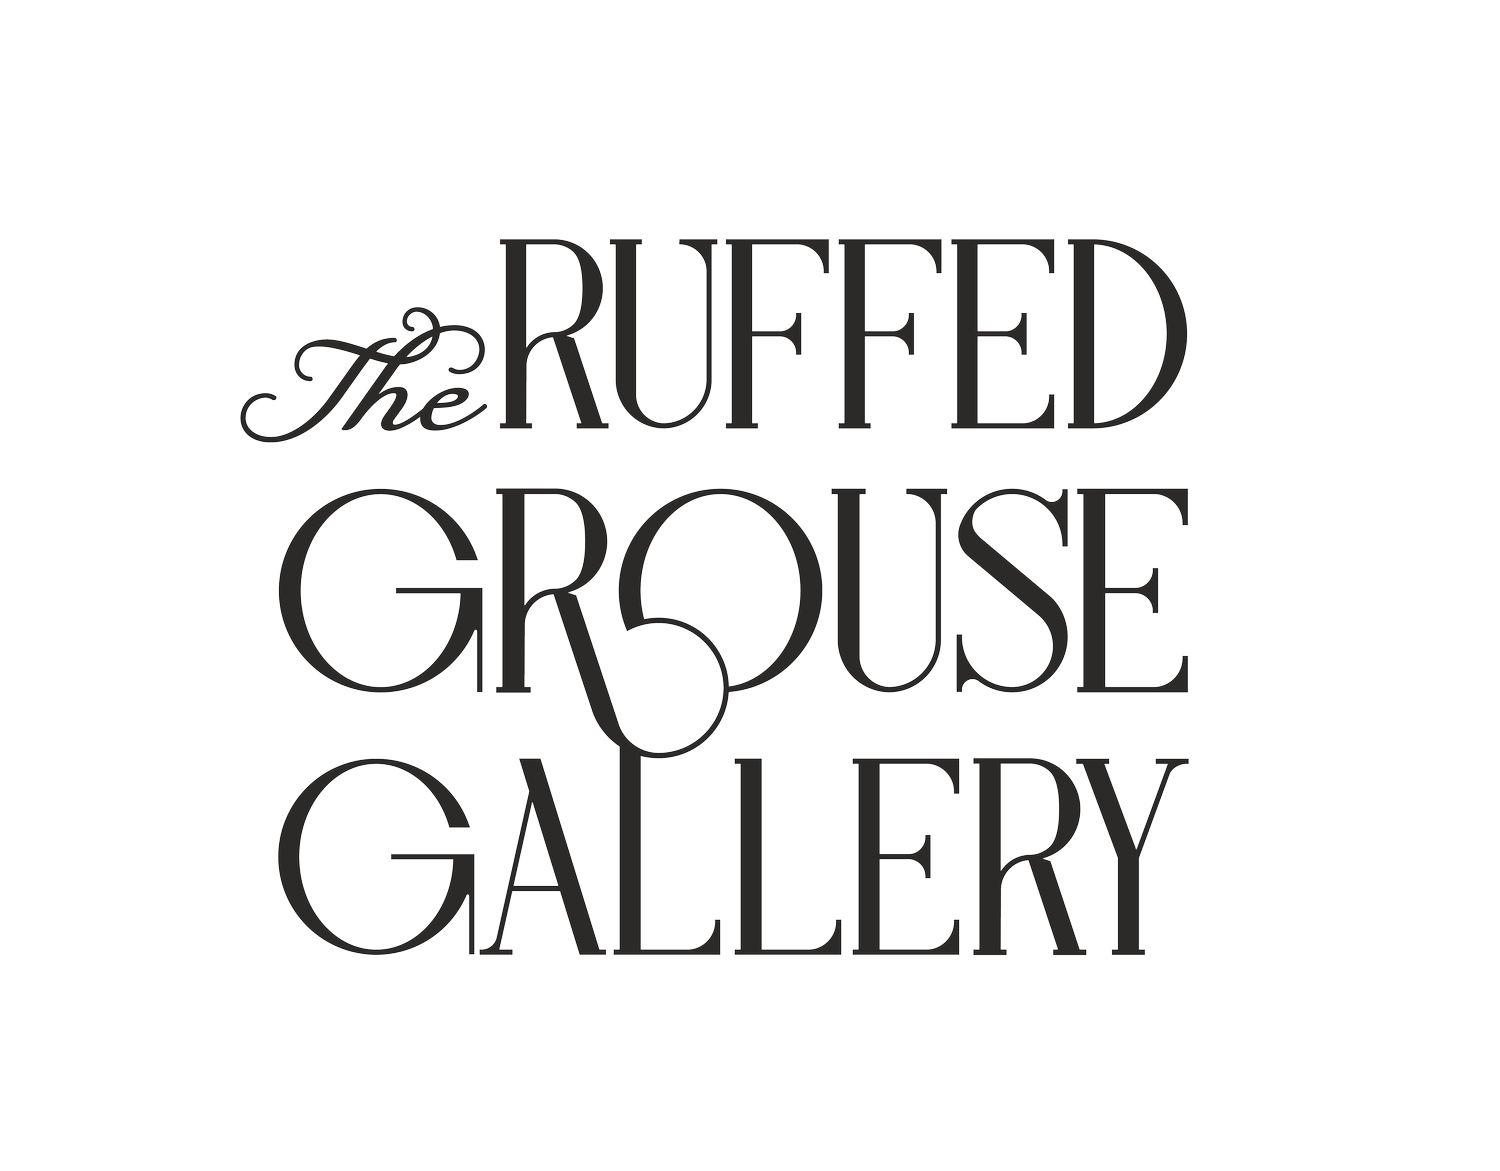 The Ruffed Grouse Gallery